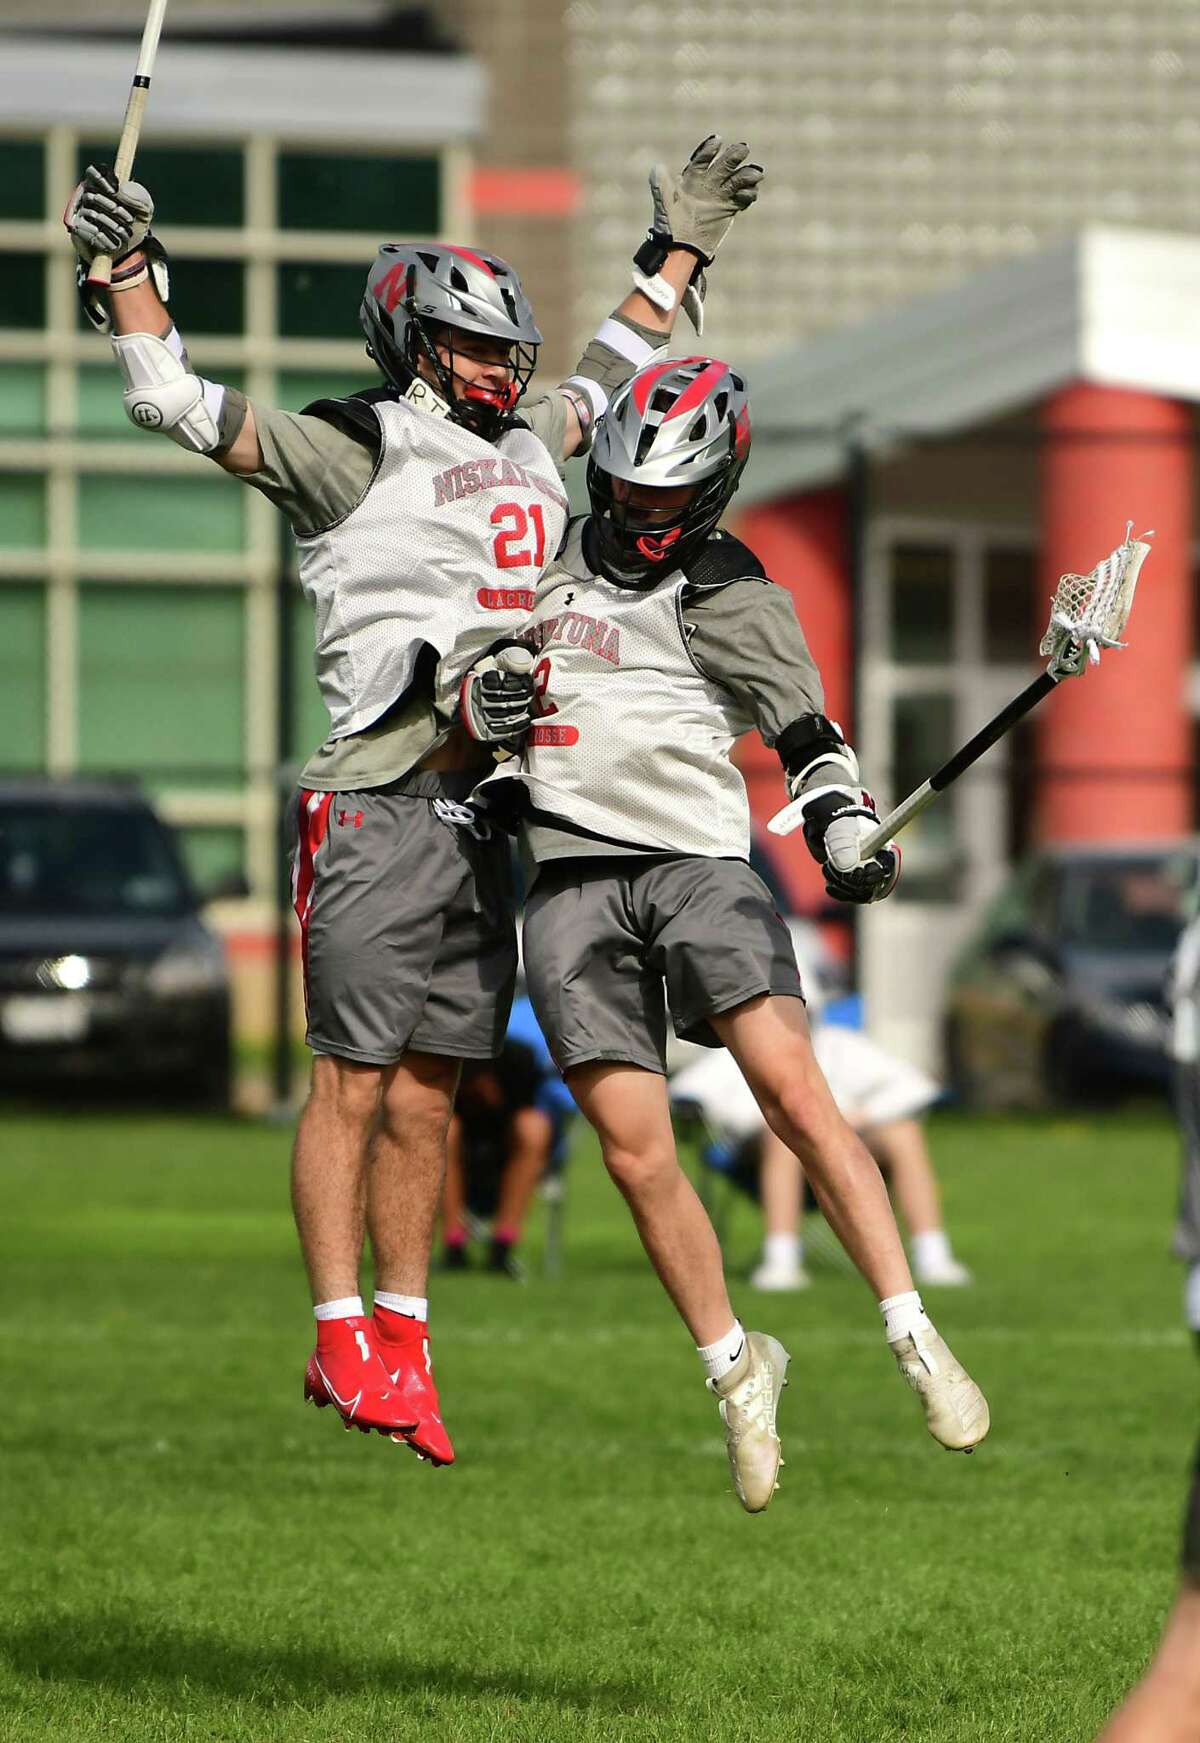 Niskayuna’s Brock Behrman, left, celebrates with Cole Nappi after scoring during a lacrosse scrimmage against Shenendehowa on Monday, May 3, 2021 in Niskayuna, N.Y. (Lori Van Buren/Times Union)